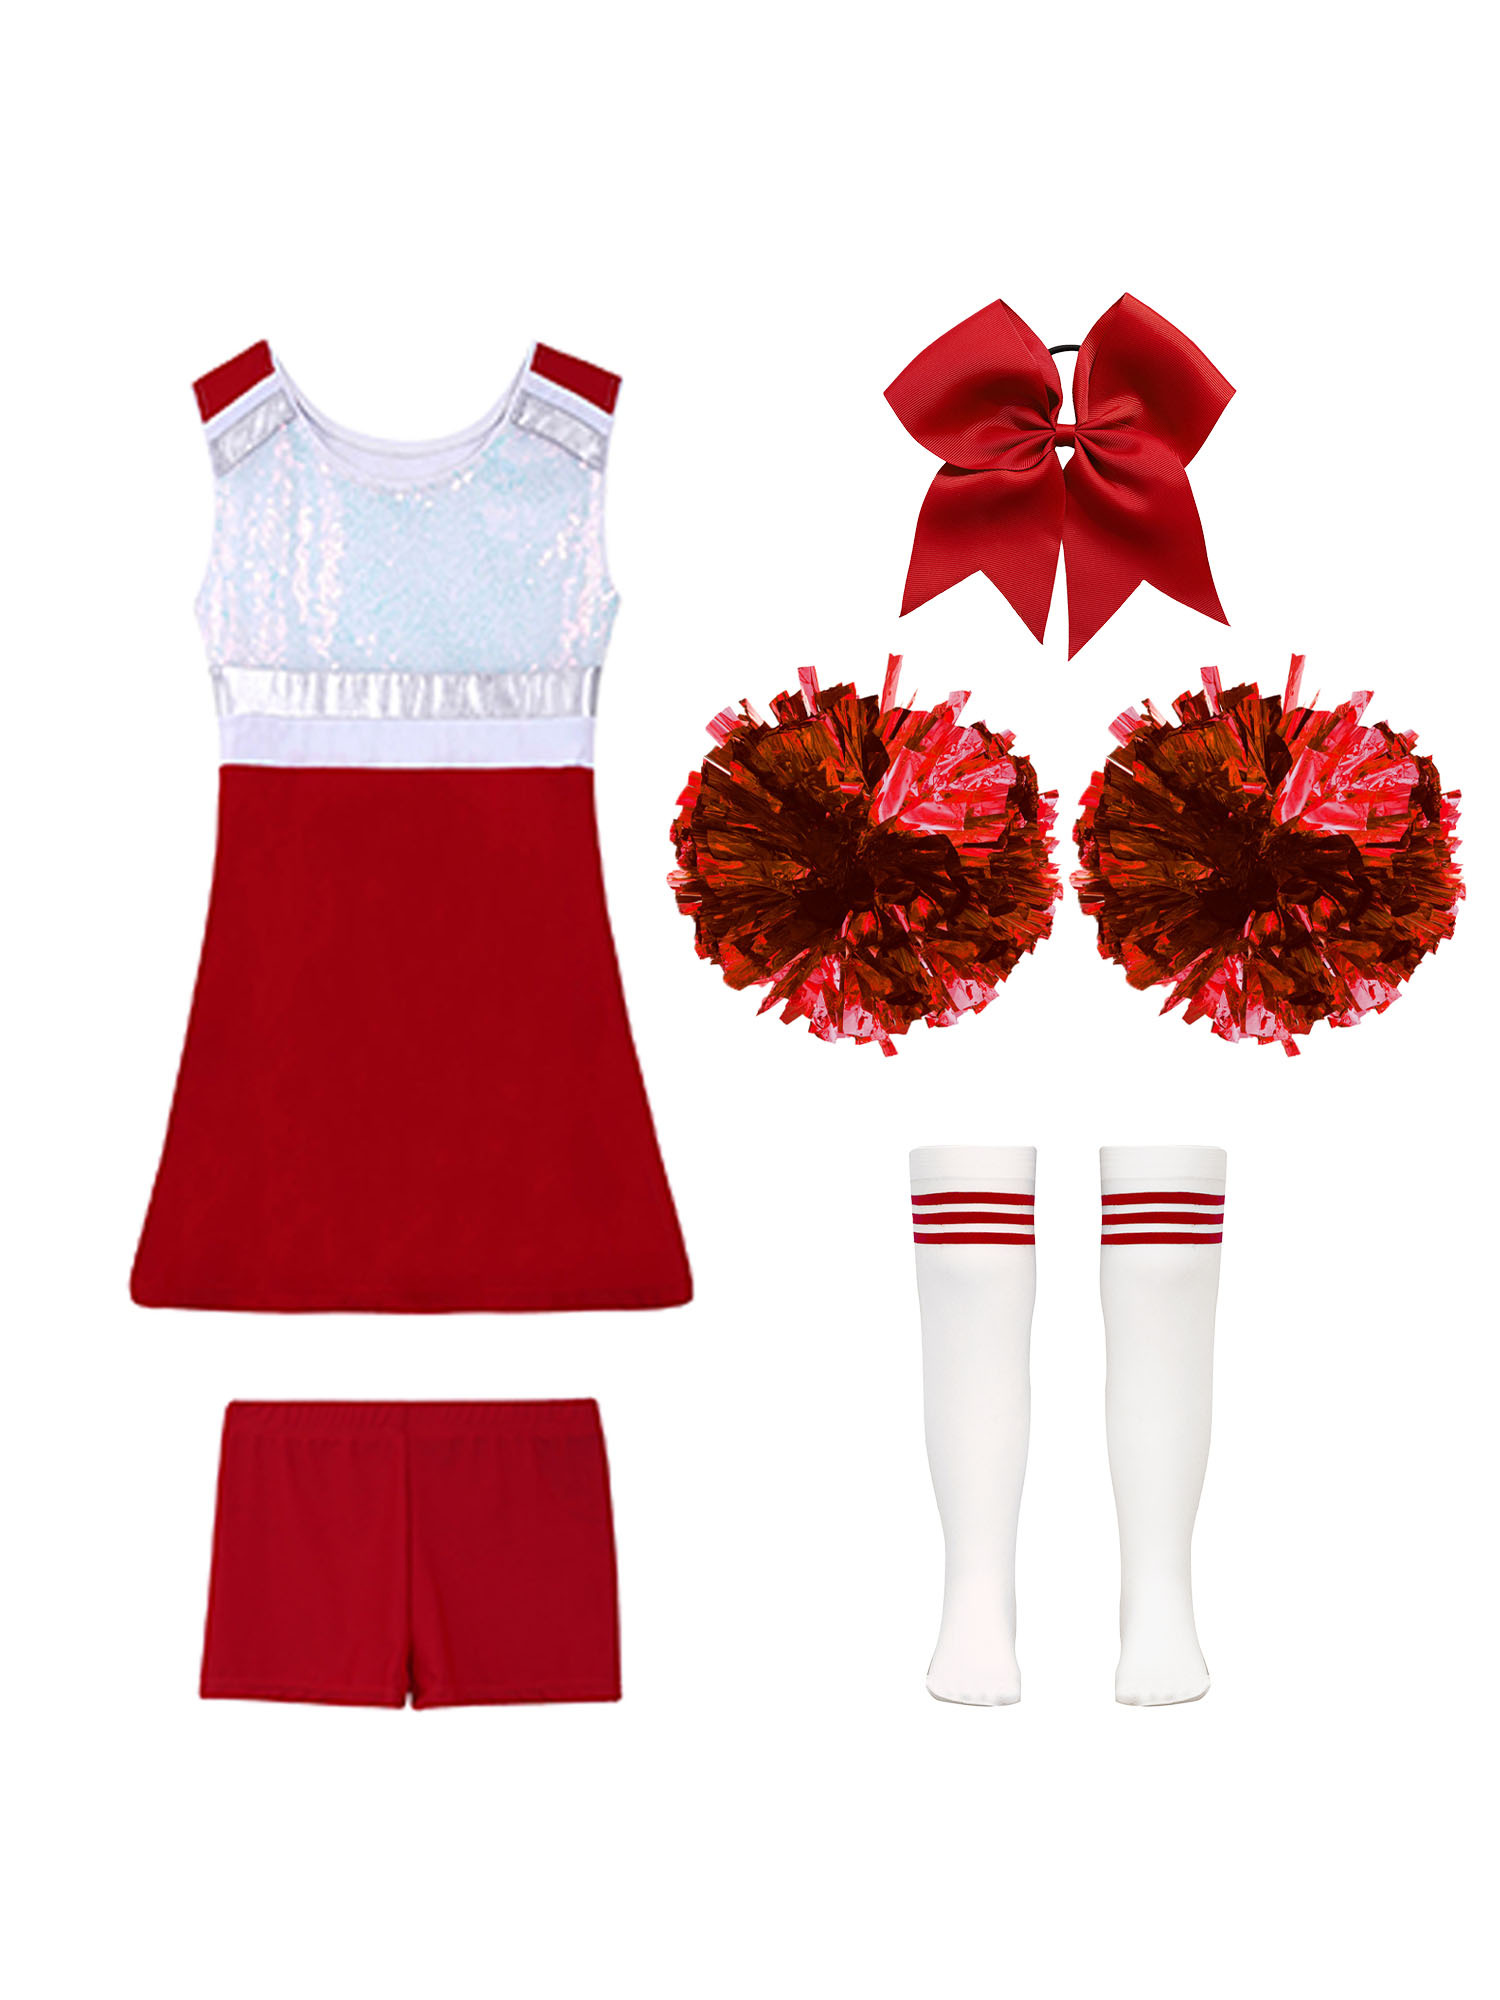 TiaoBug Kids Girls Cheer Leader Uniform Sports Games Cheerleading Dance Outfits Halloween Carnival Fancy Dress Up A Red 12 - image 4 of 5